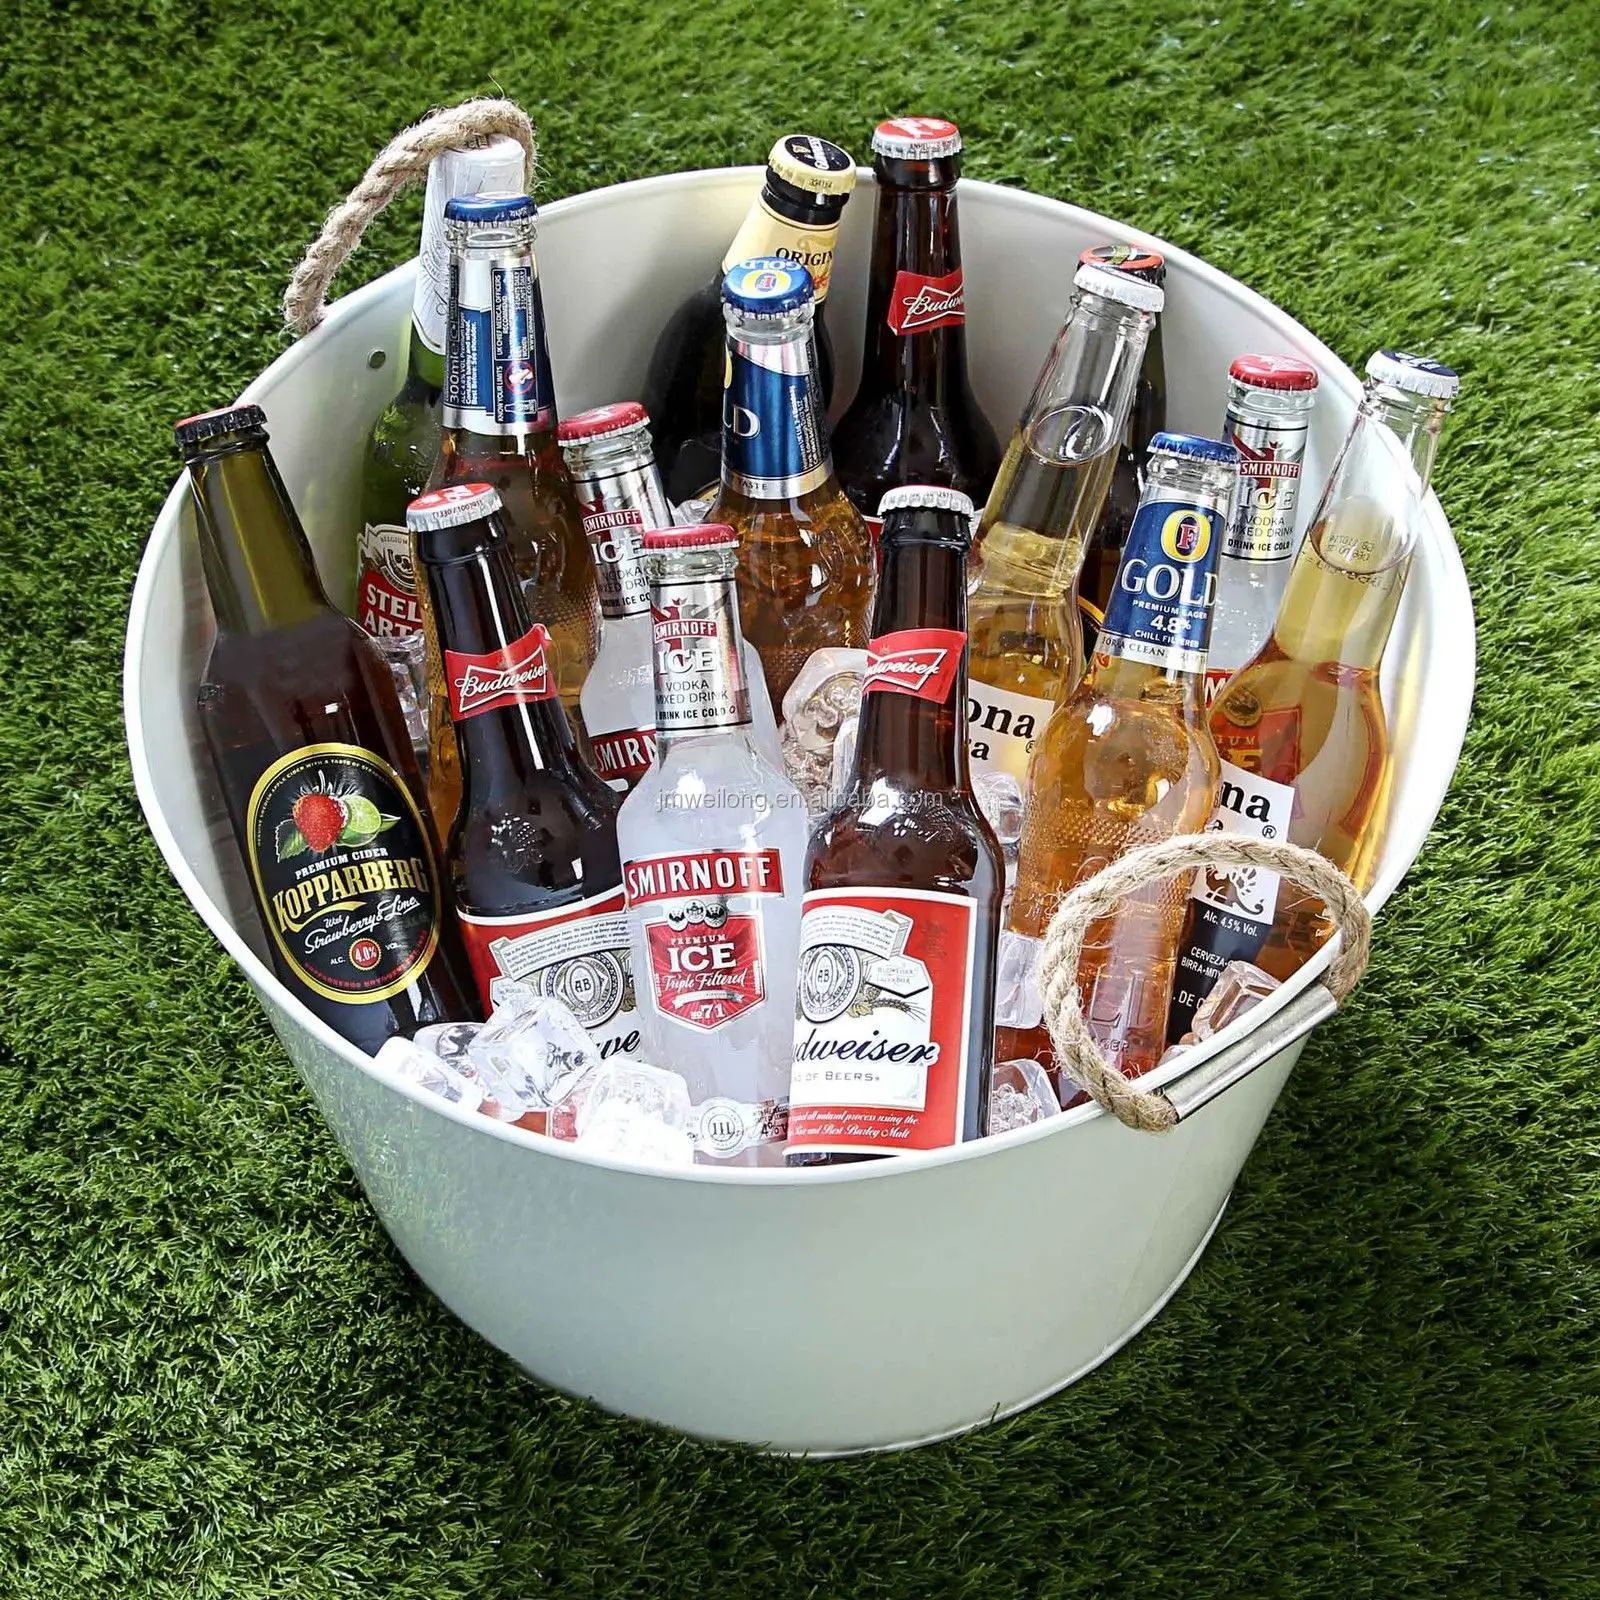 LTR LARGE PARTY BUCKET BEER FLEXI STORAGE TUB 40 LITRE DRINKS 